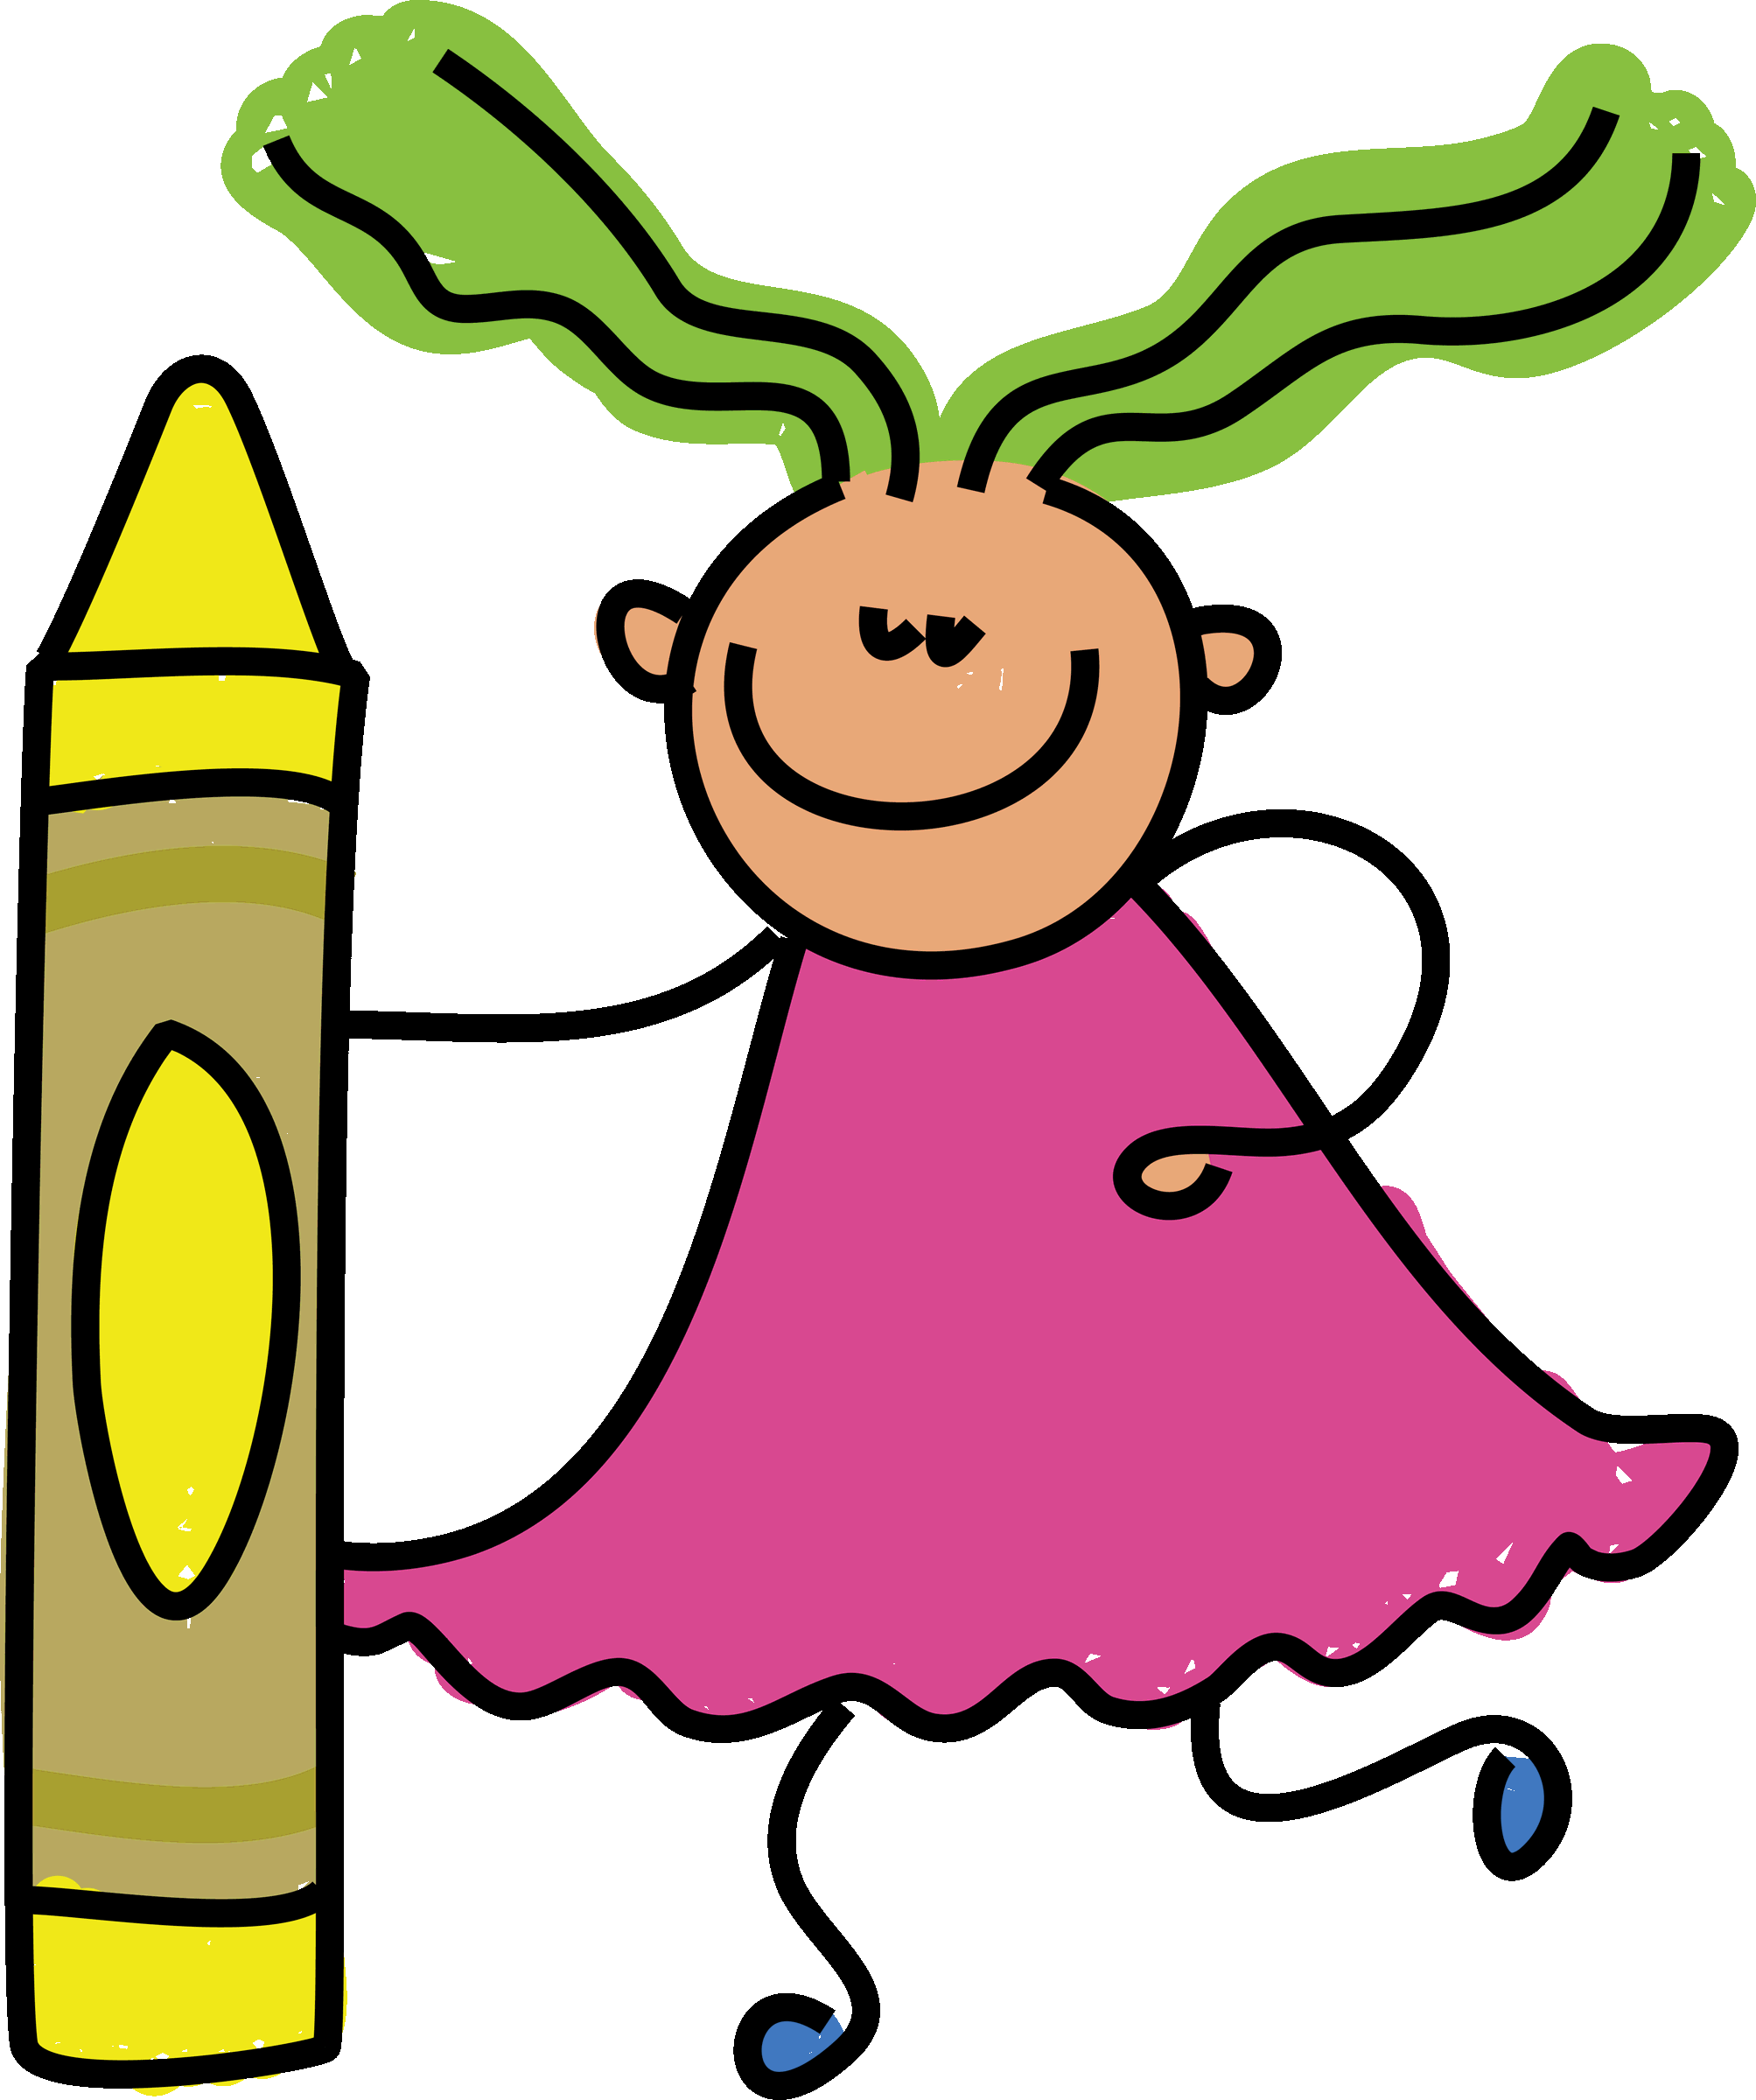 A Cartoon Of A Girl With A Pink Dress And A Yellow Crayon